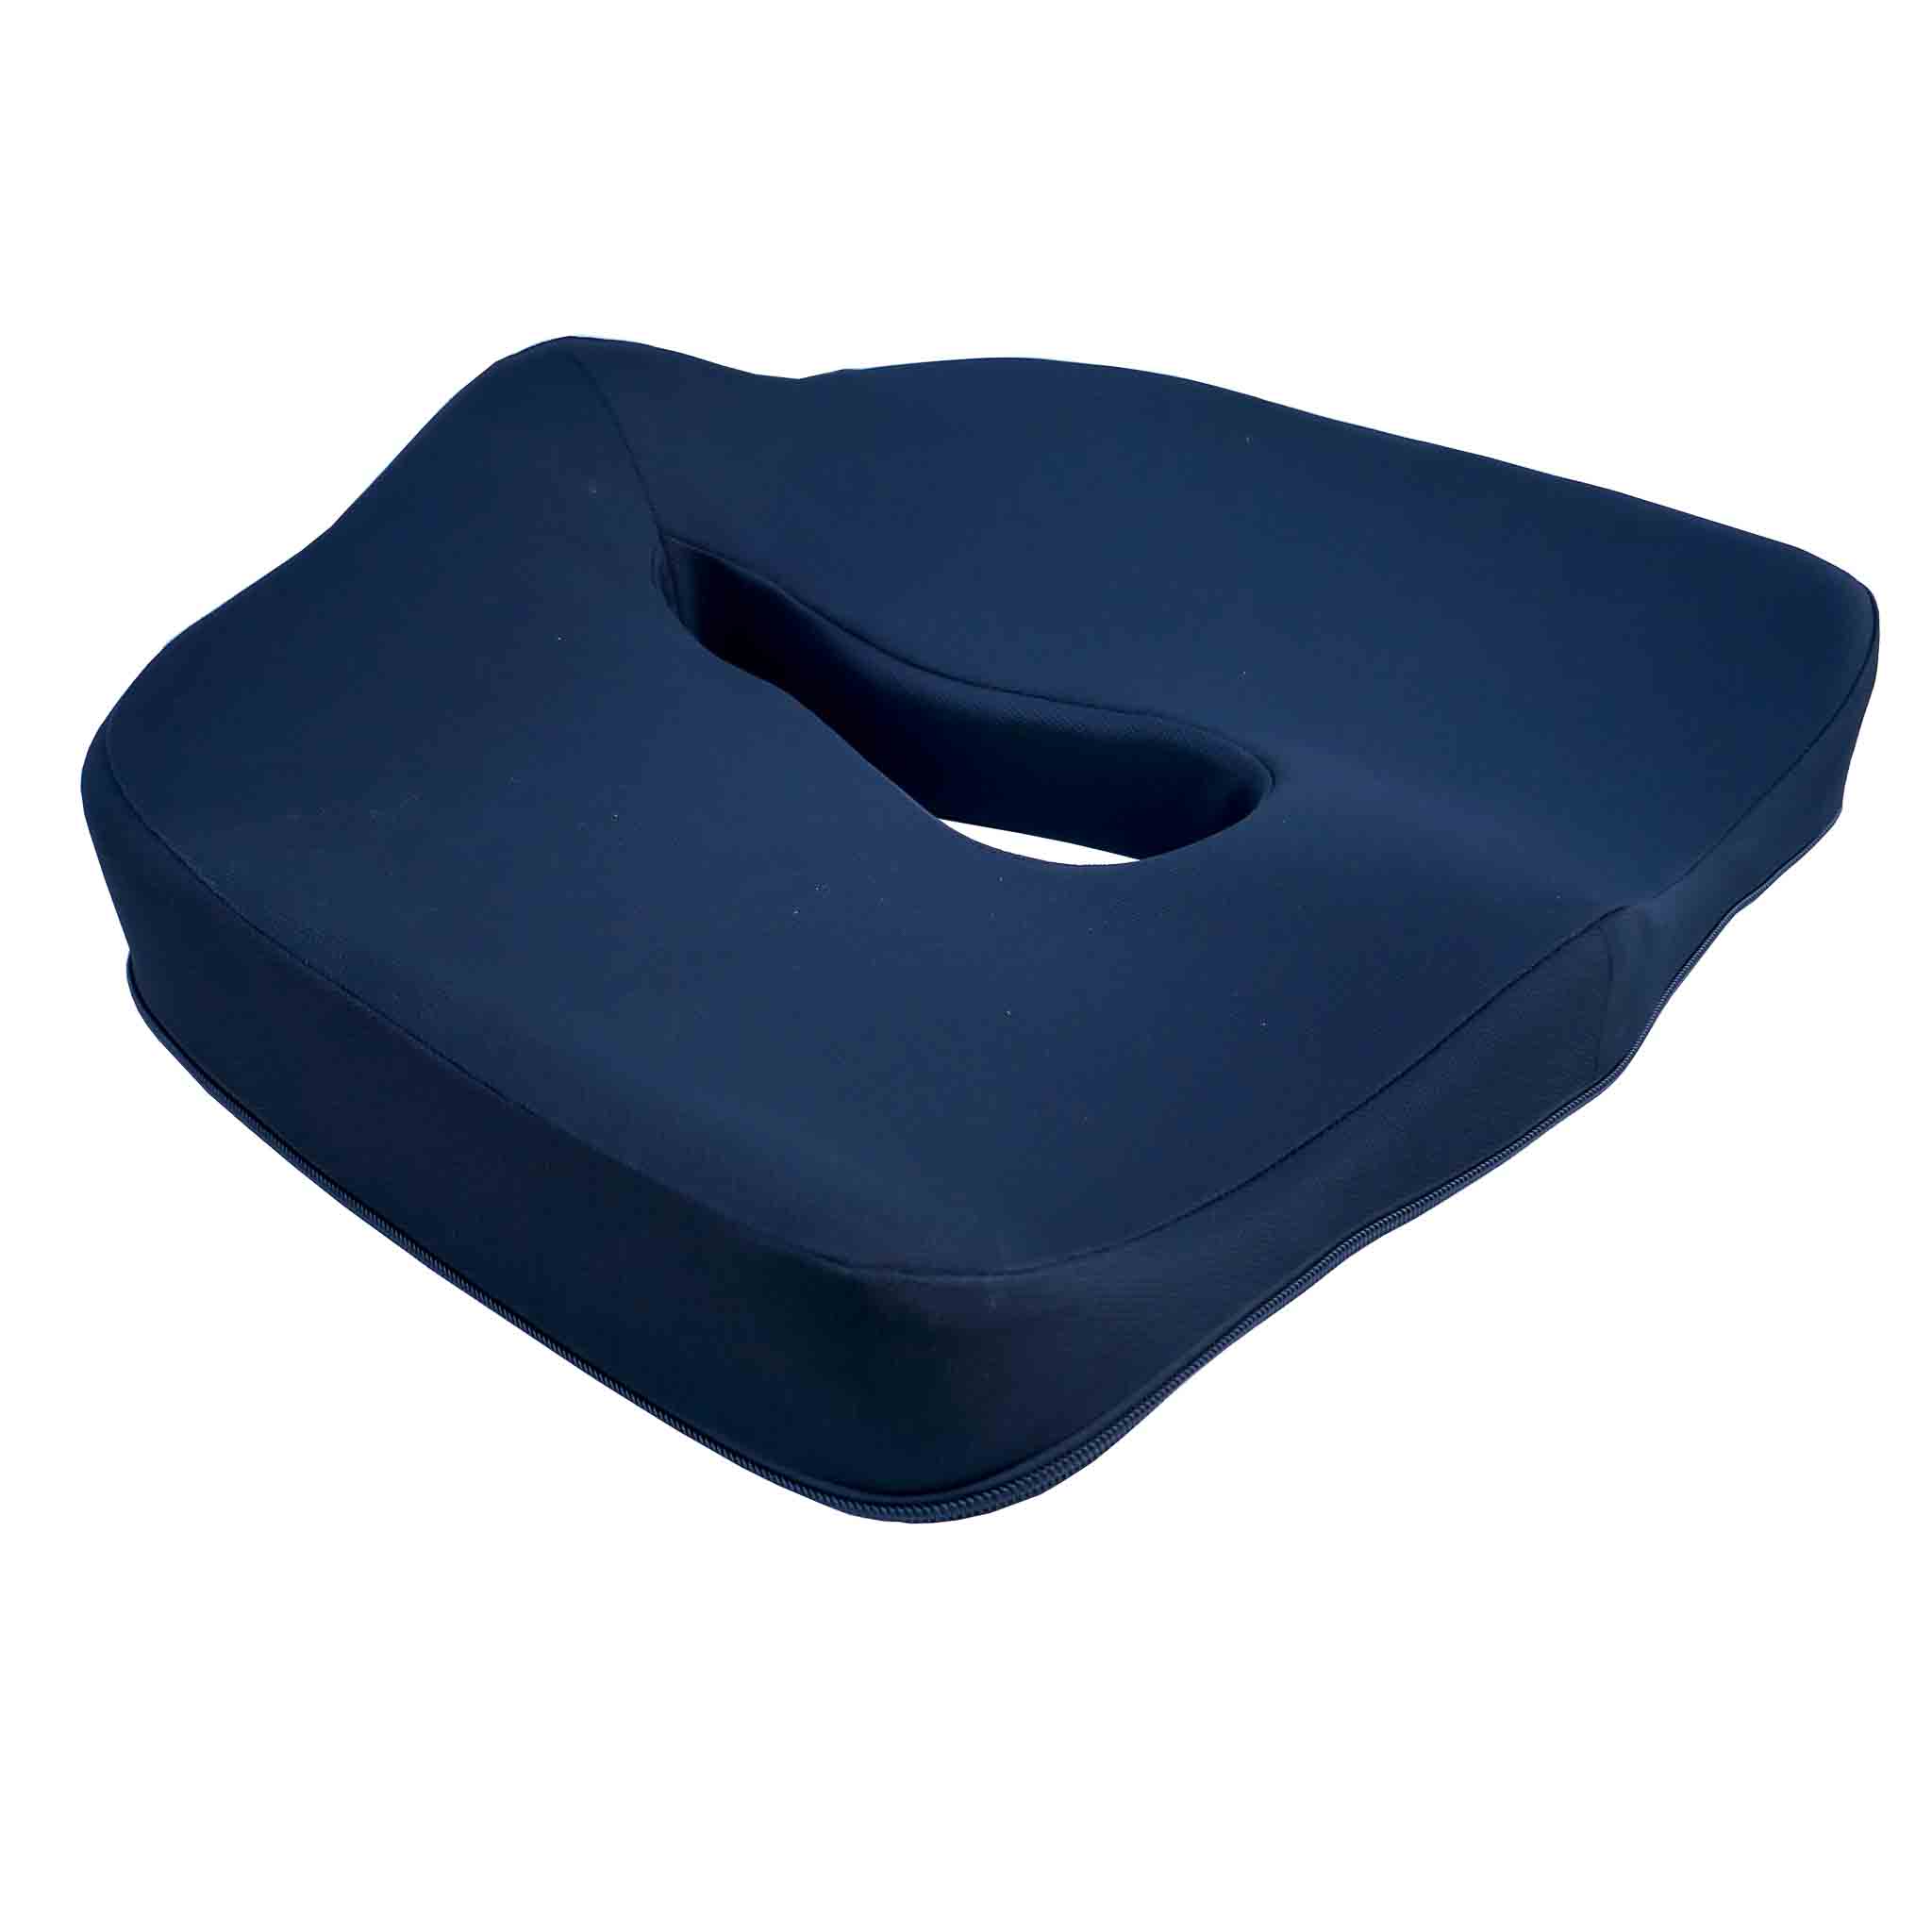 OrthoComfort Coccyx Cushion - Relieve Tailbone Pain and Discomfort